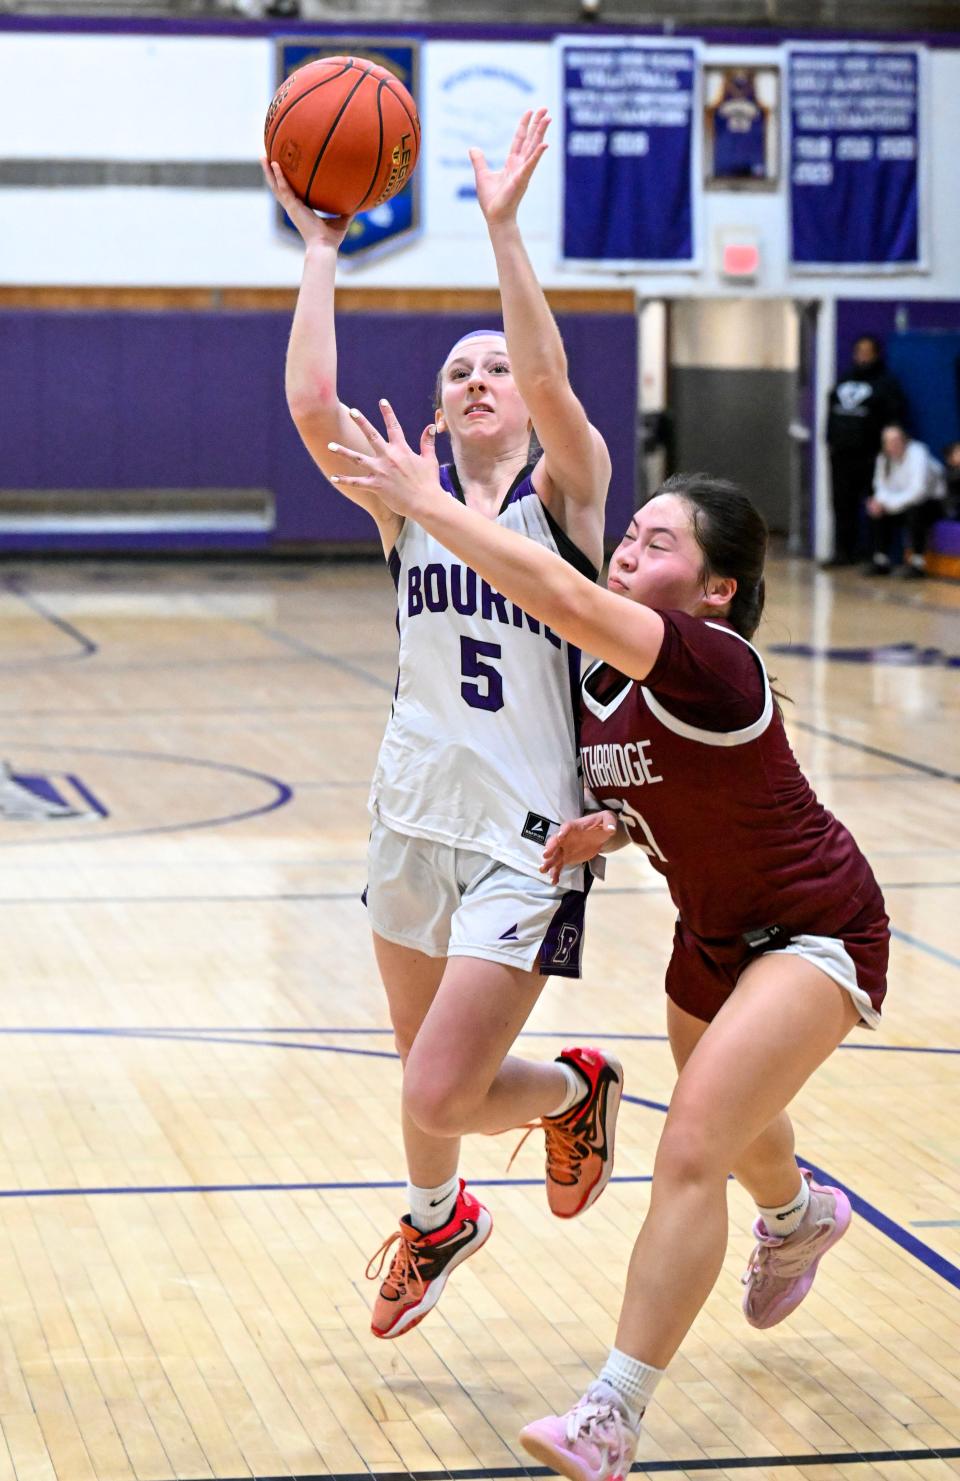 Paige Meda of Bourne goes in to score against Erika Dresp of Northbridge in the Division 2 Sweet 16 girls basketball game.